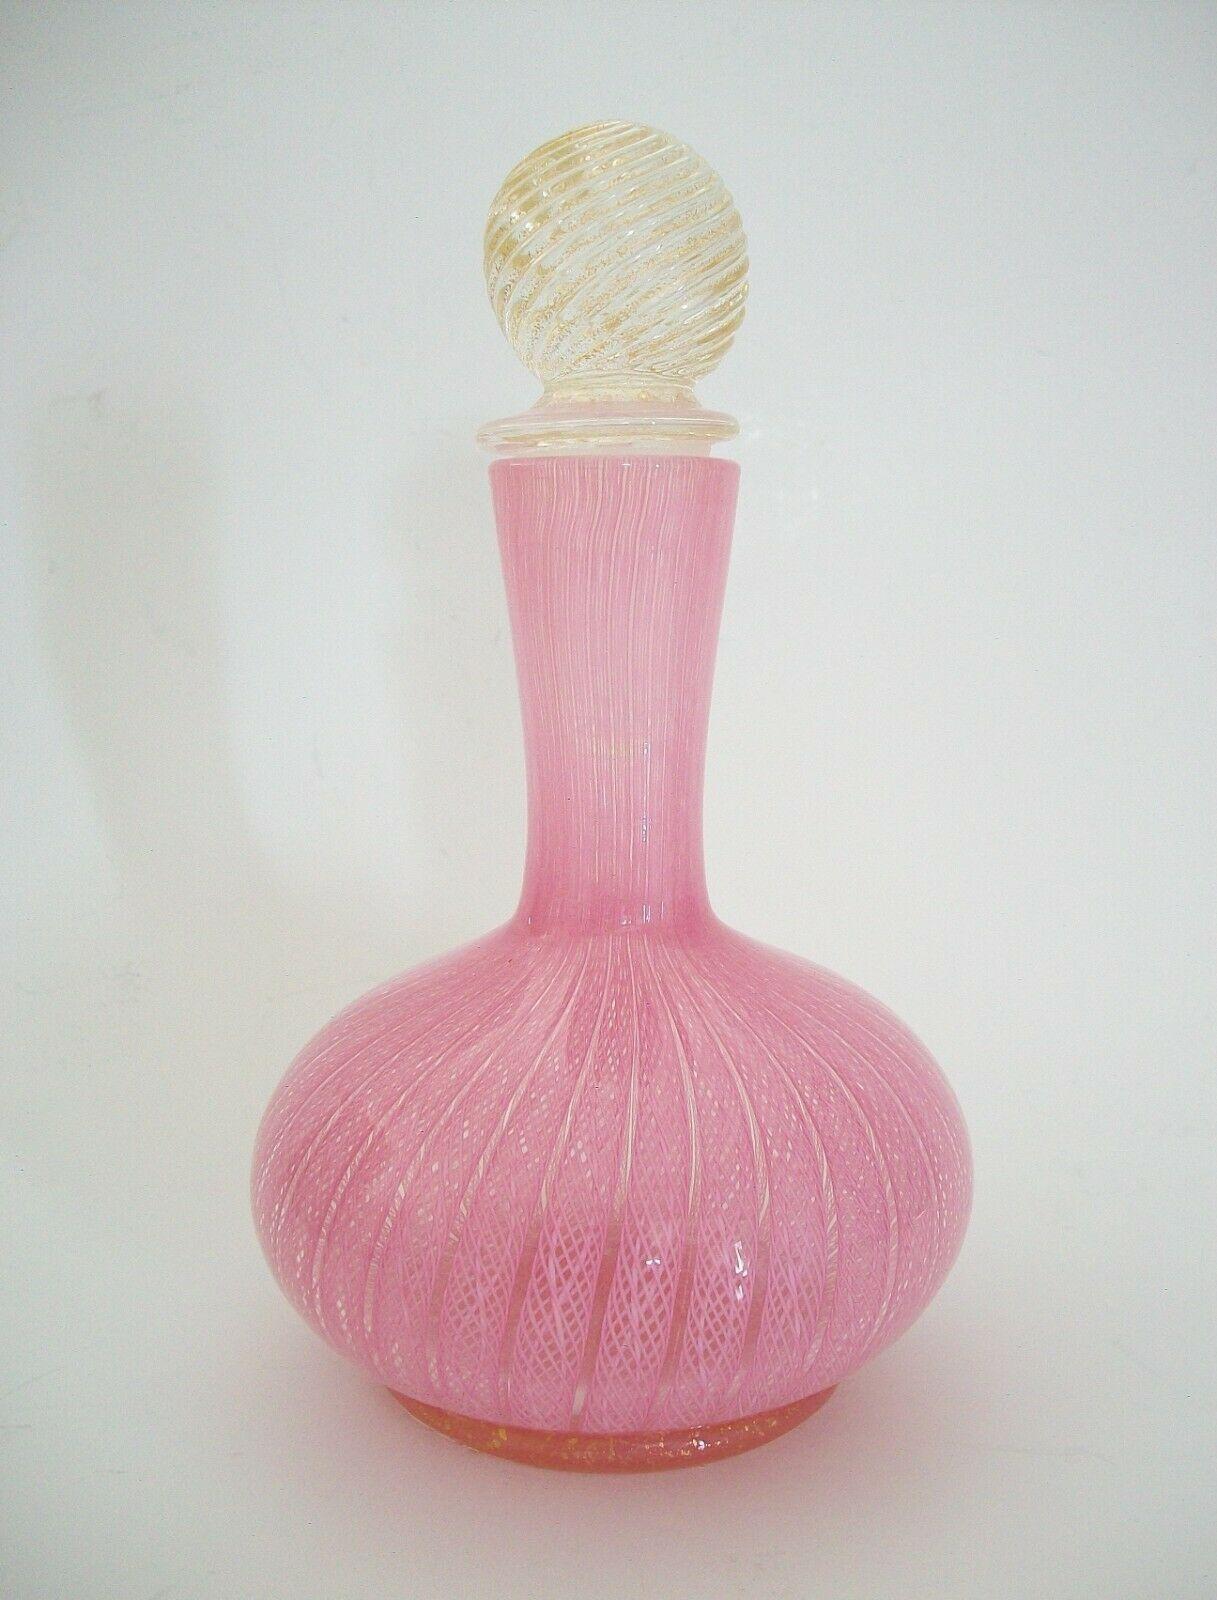 Vintage Murano art glass pink latticino perfume bottle with gold aventurine glass base and stopper - swirl pattern to the stopper - extremely fine 'thread like' vertical pattern to the neck - ground pontil mark - unsigned - Italy - circa